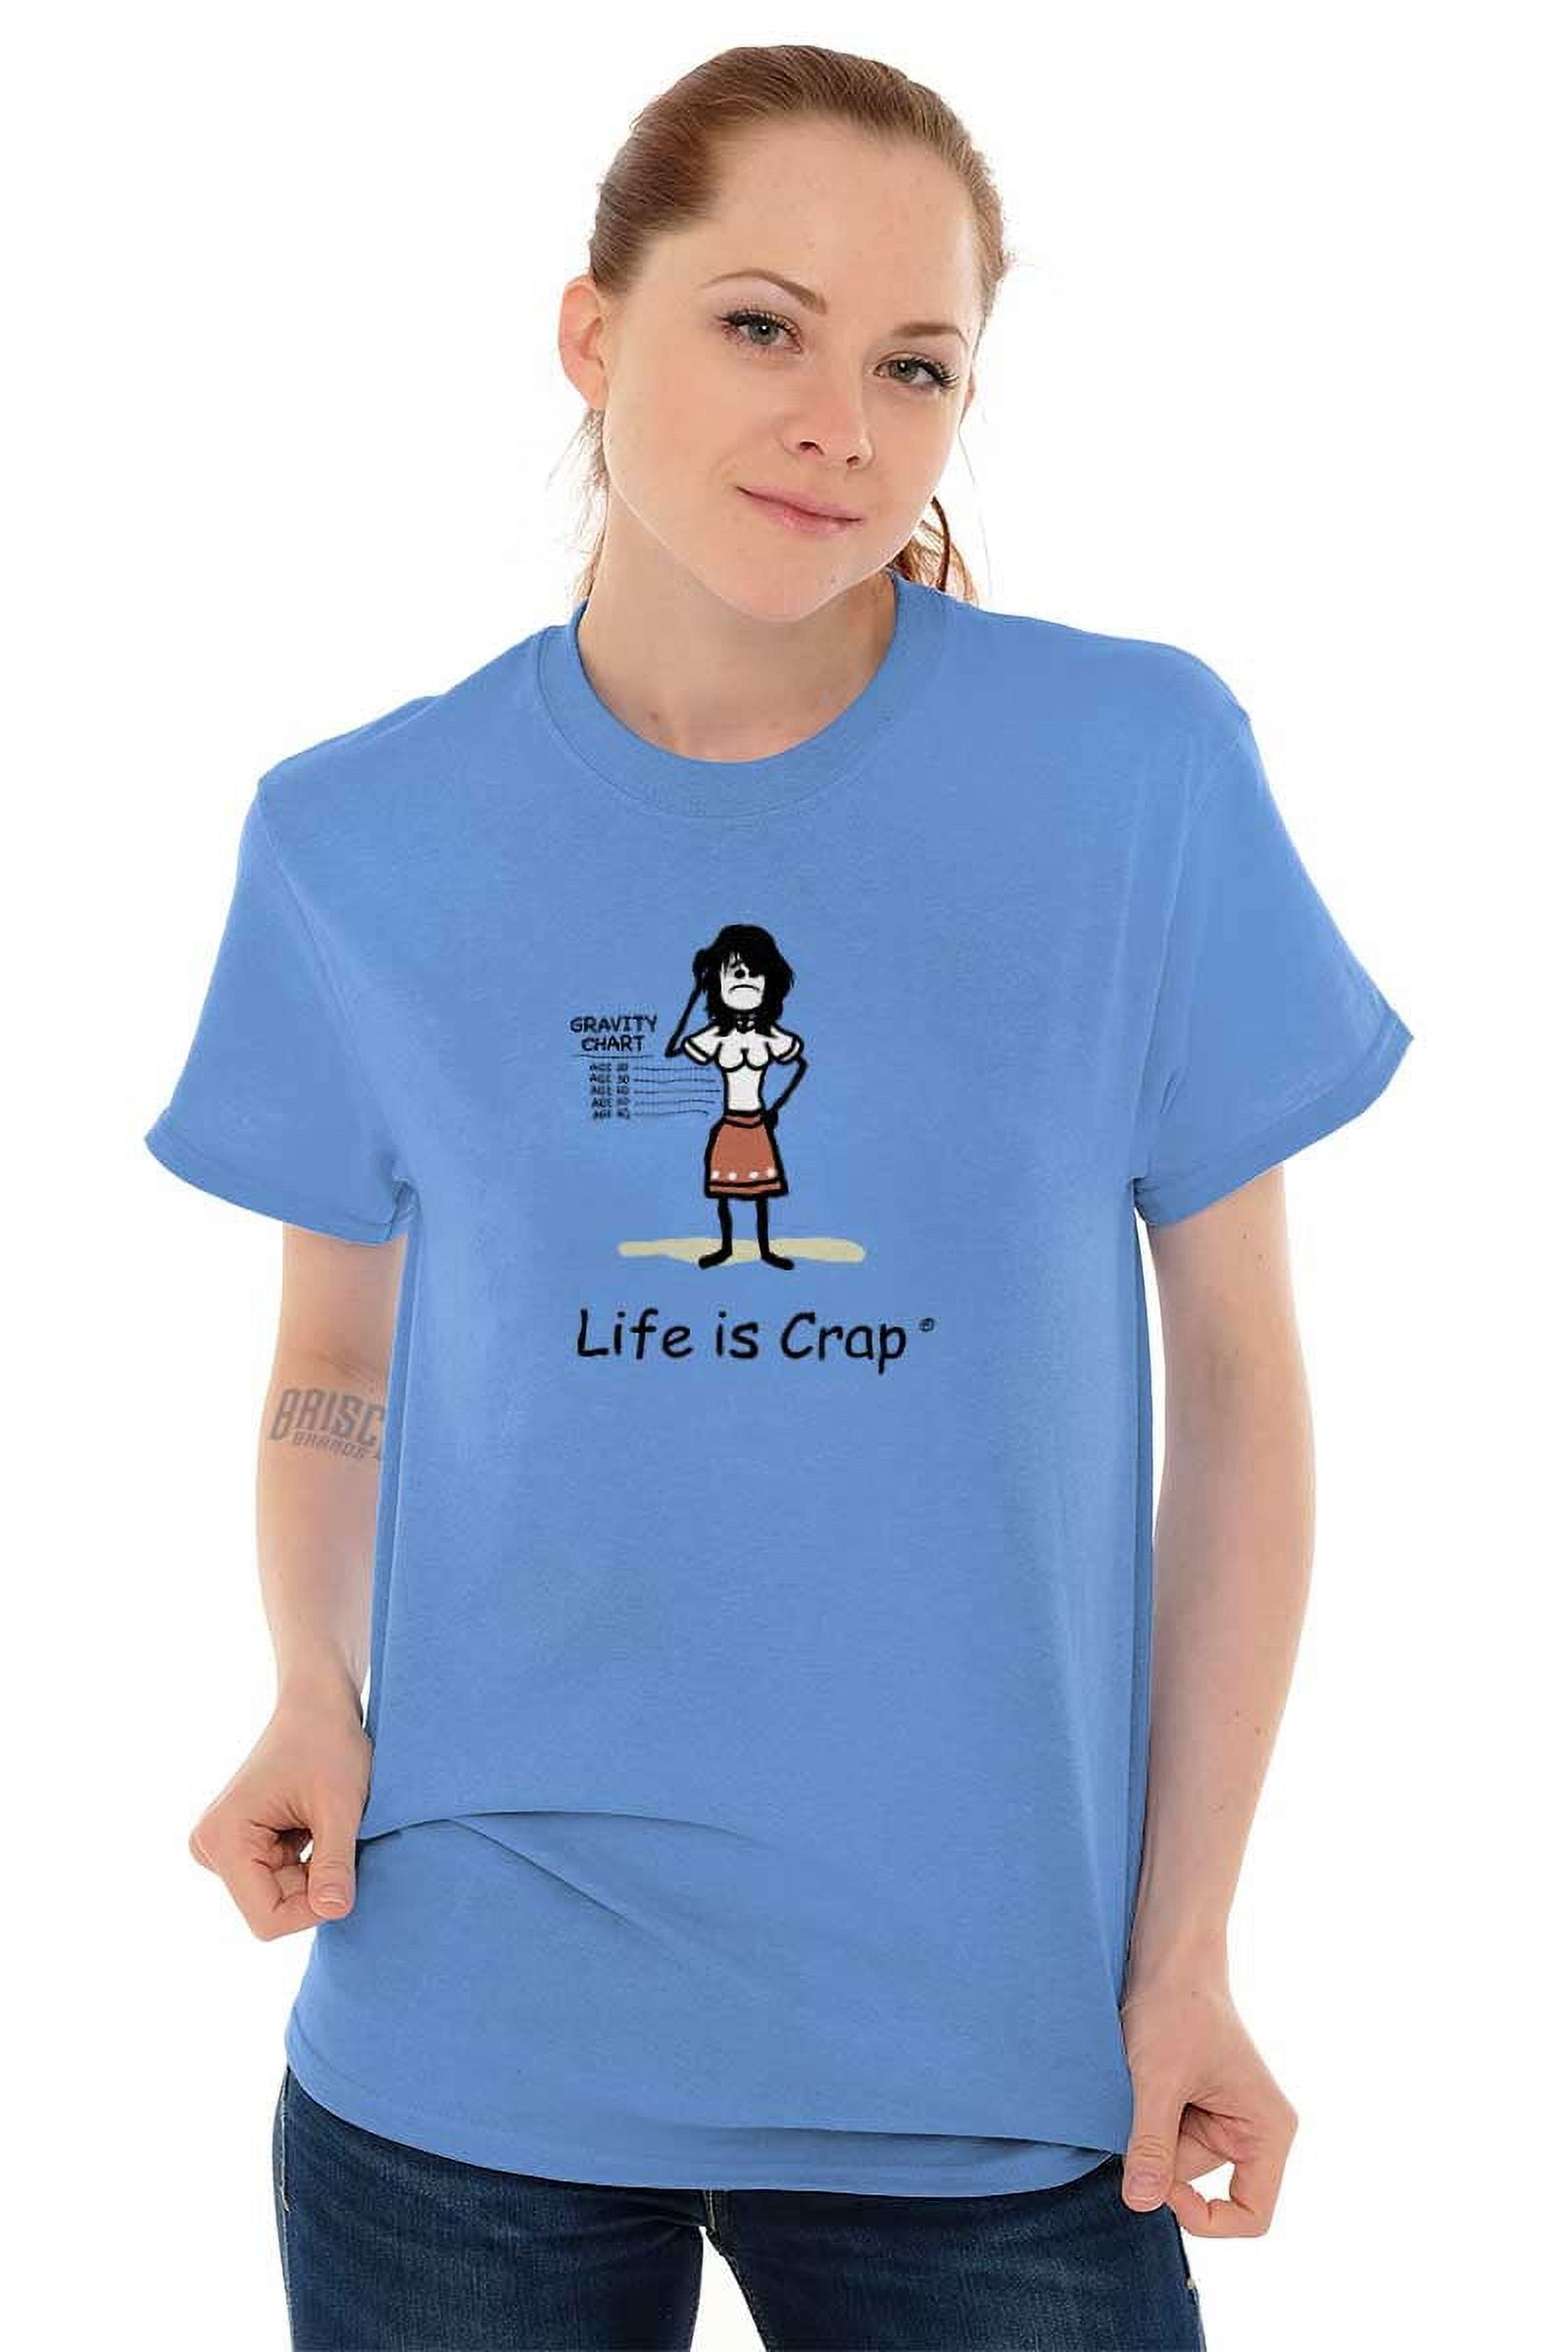 Saggy Boobs Funny Mom Humor Mors Day Women's Graphic T Shirt Tees Brisco  Brands S 